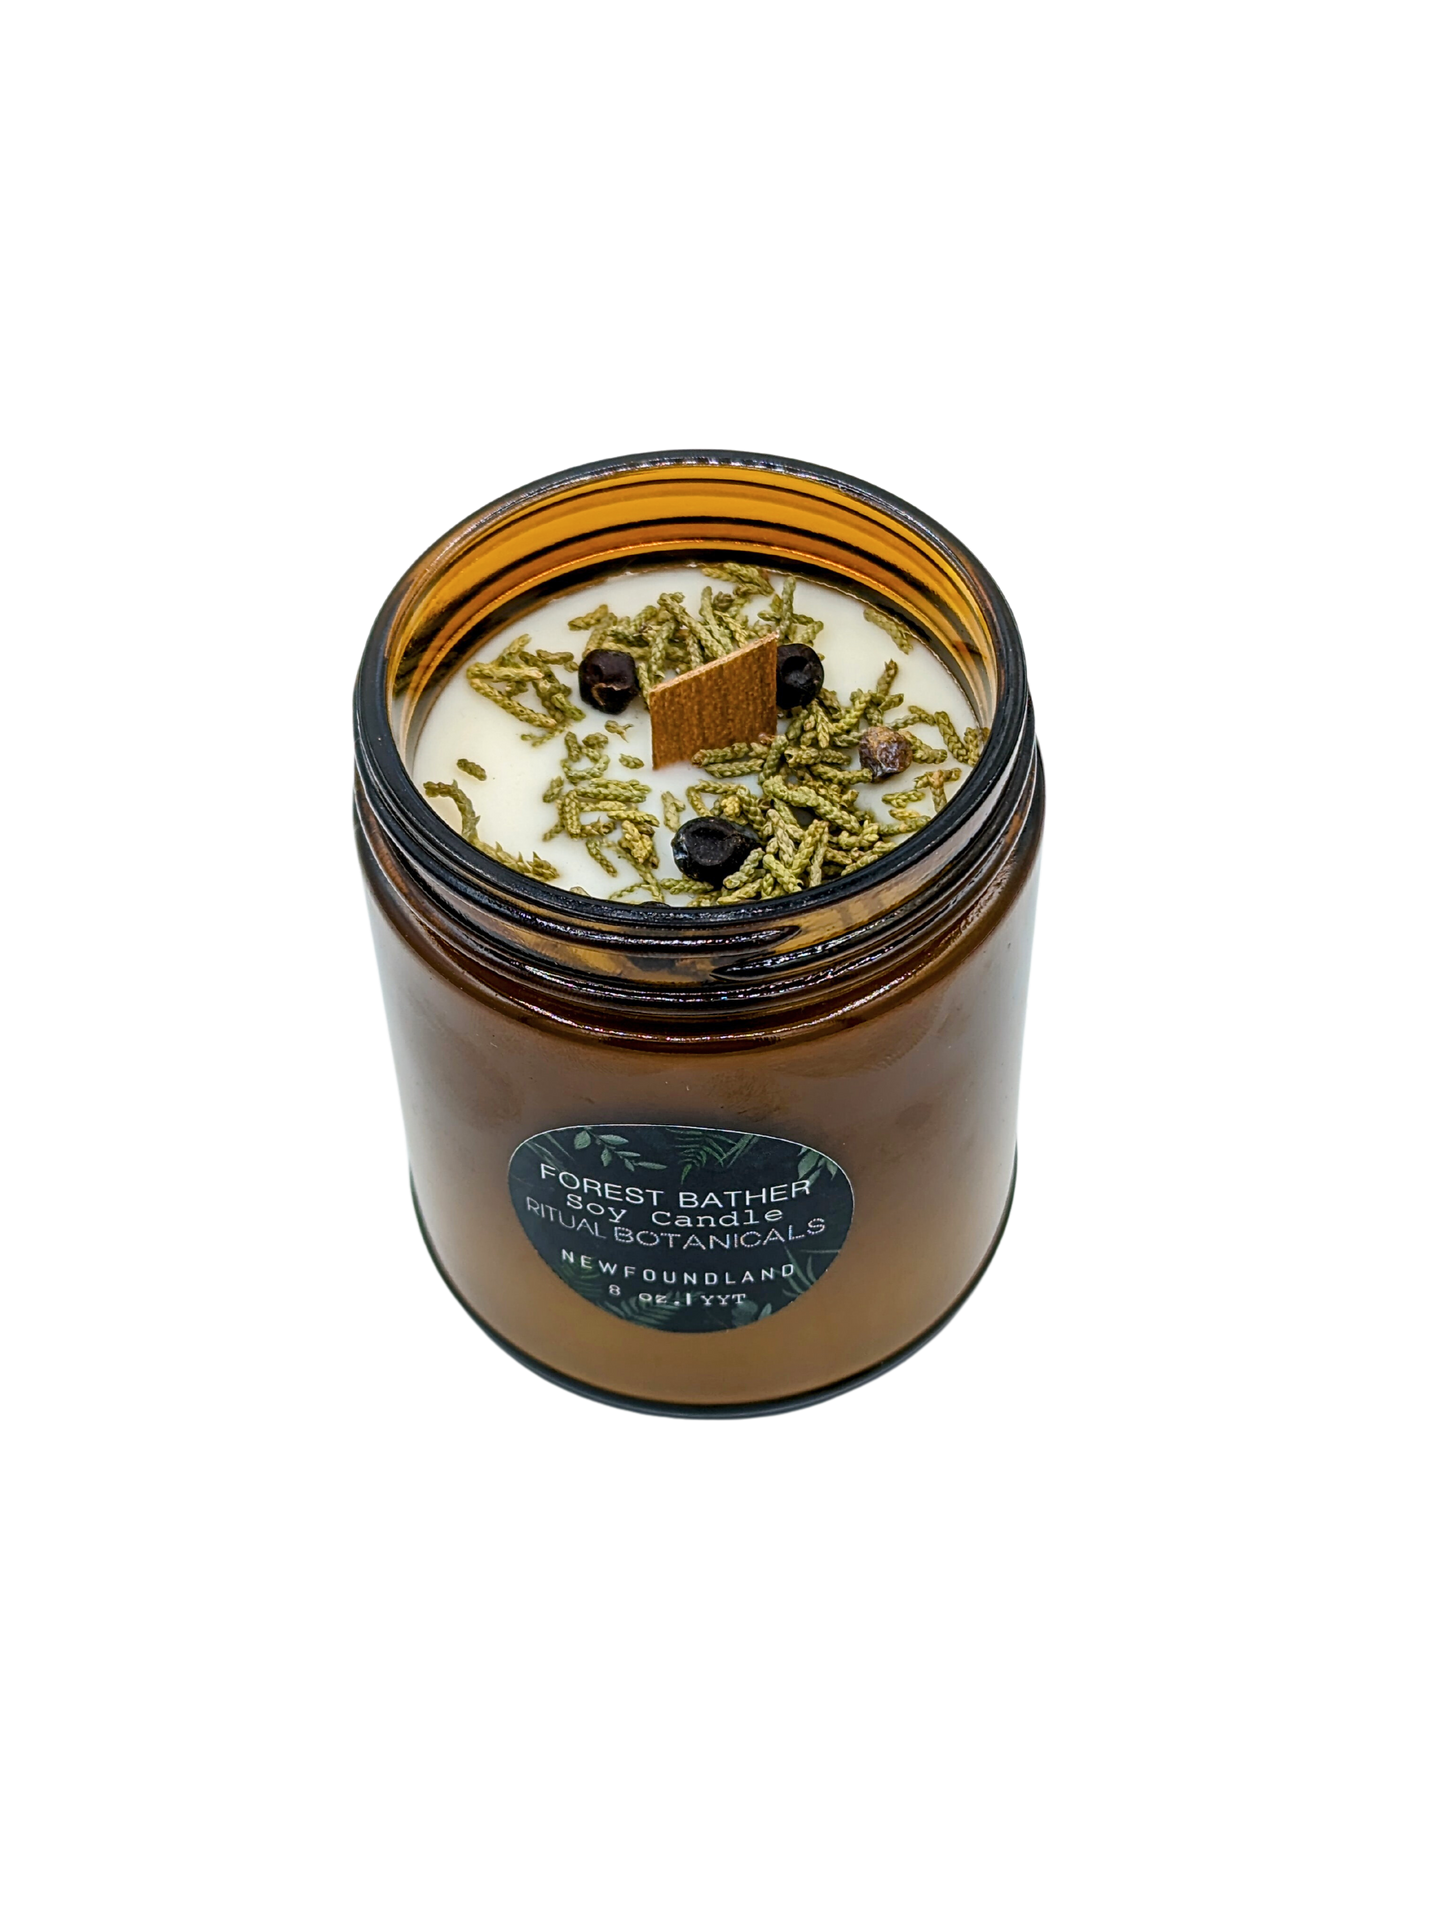 The Forest Bather Candle